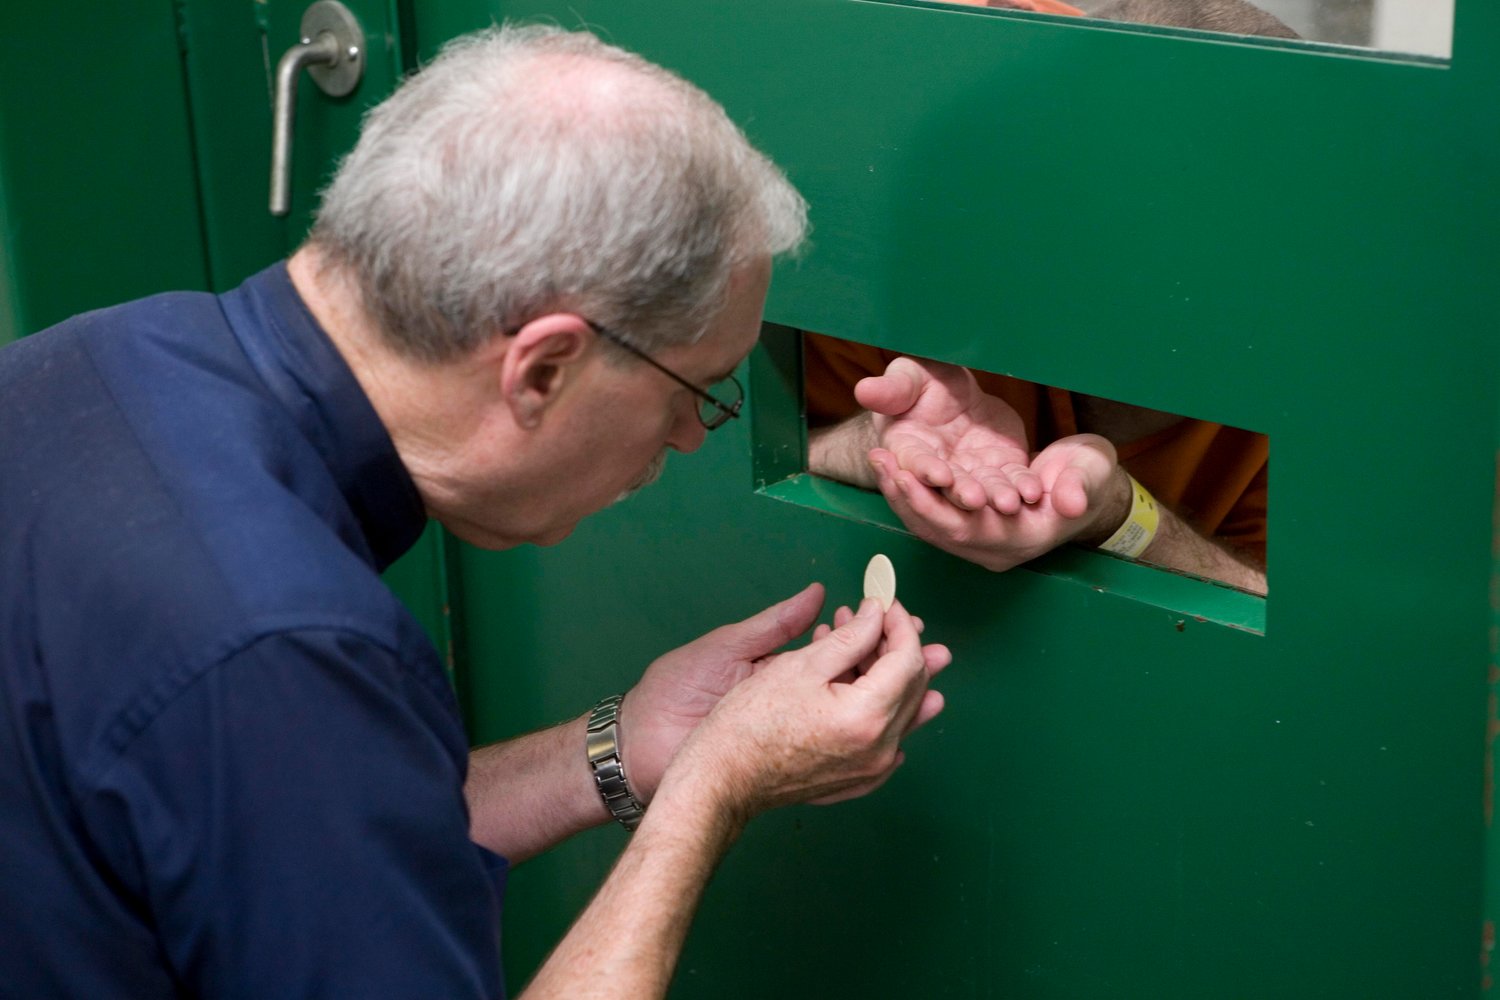 Father Ron Cloutier gives Communion through a slot to an inmate in solitary confinement at a Texas Department of Criminal Justice prison in this undated photo.